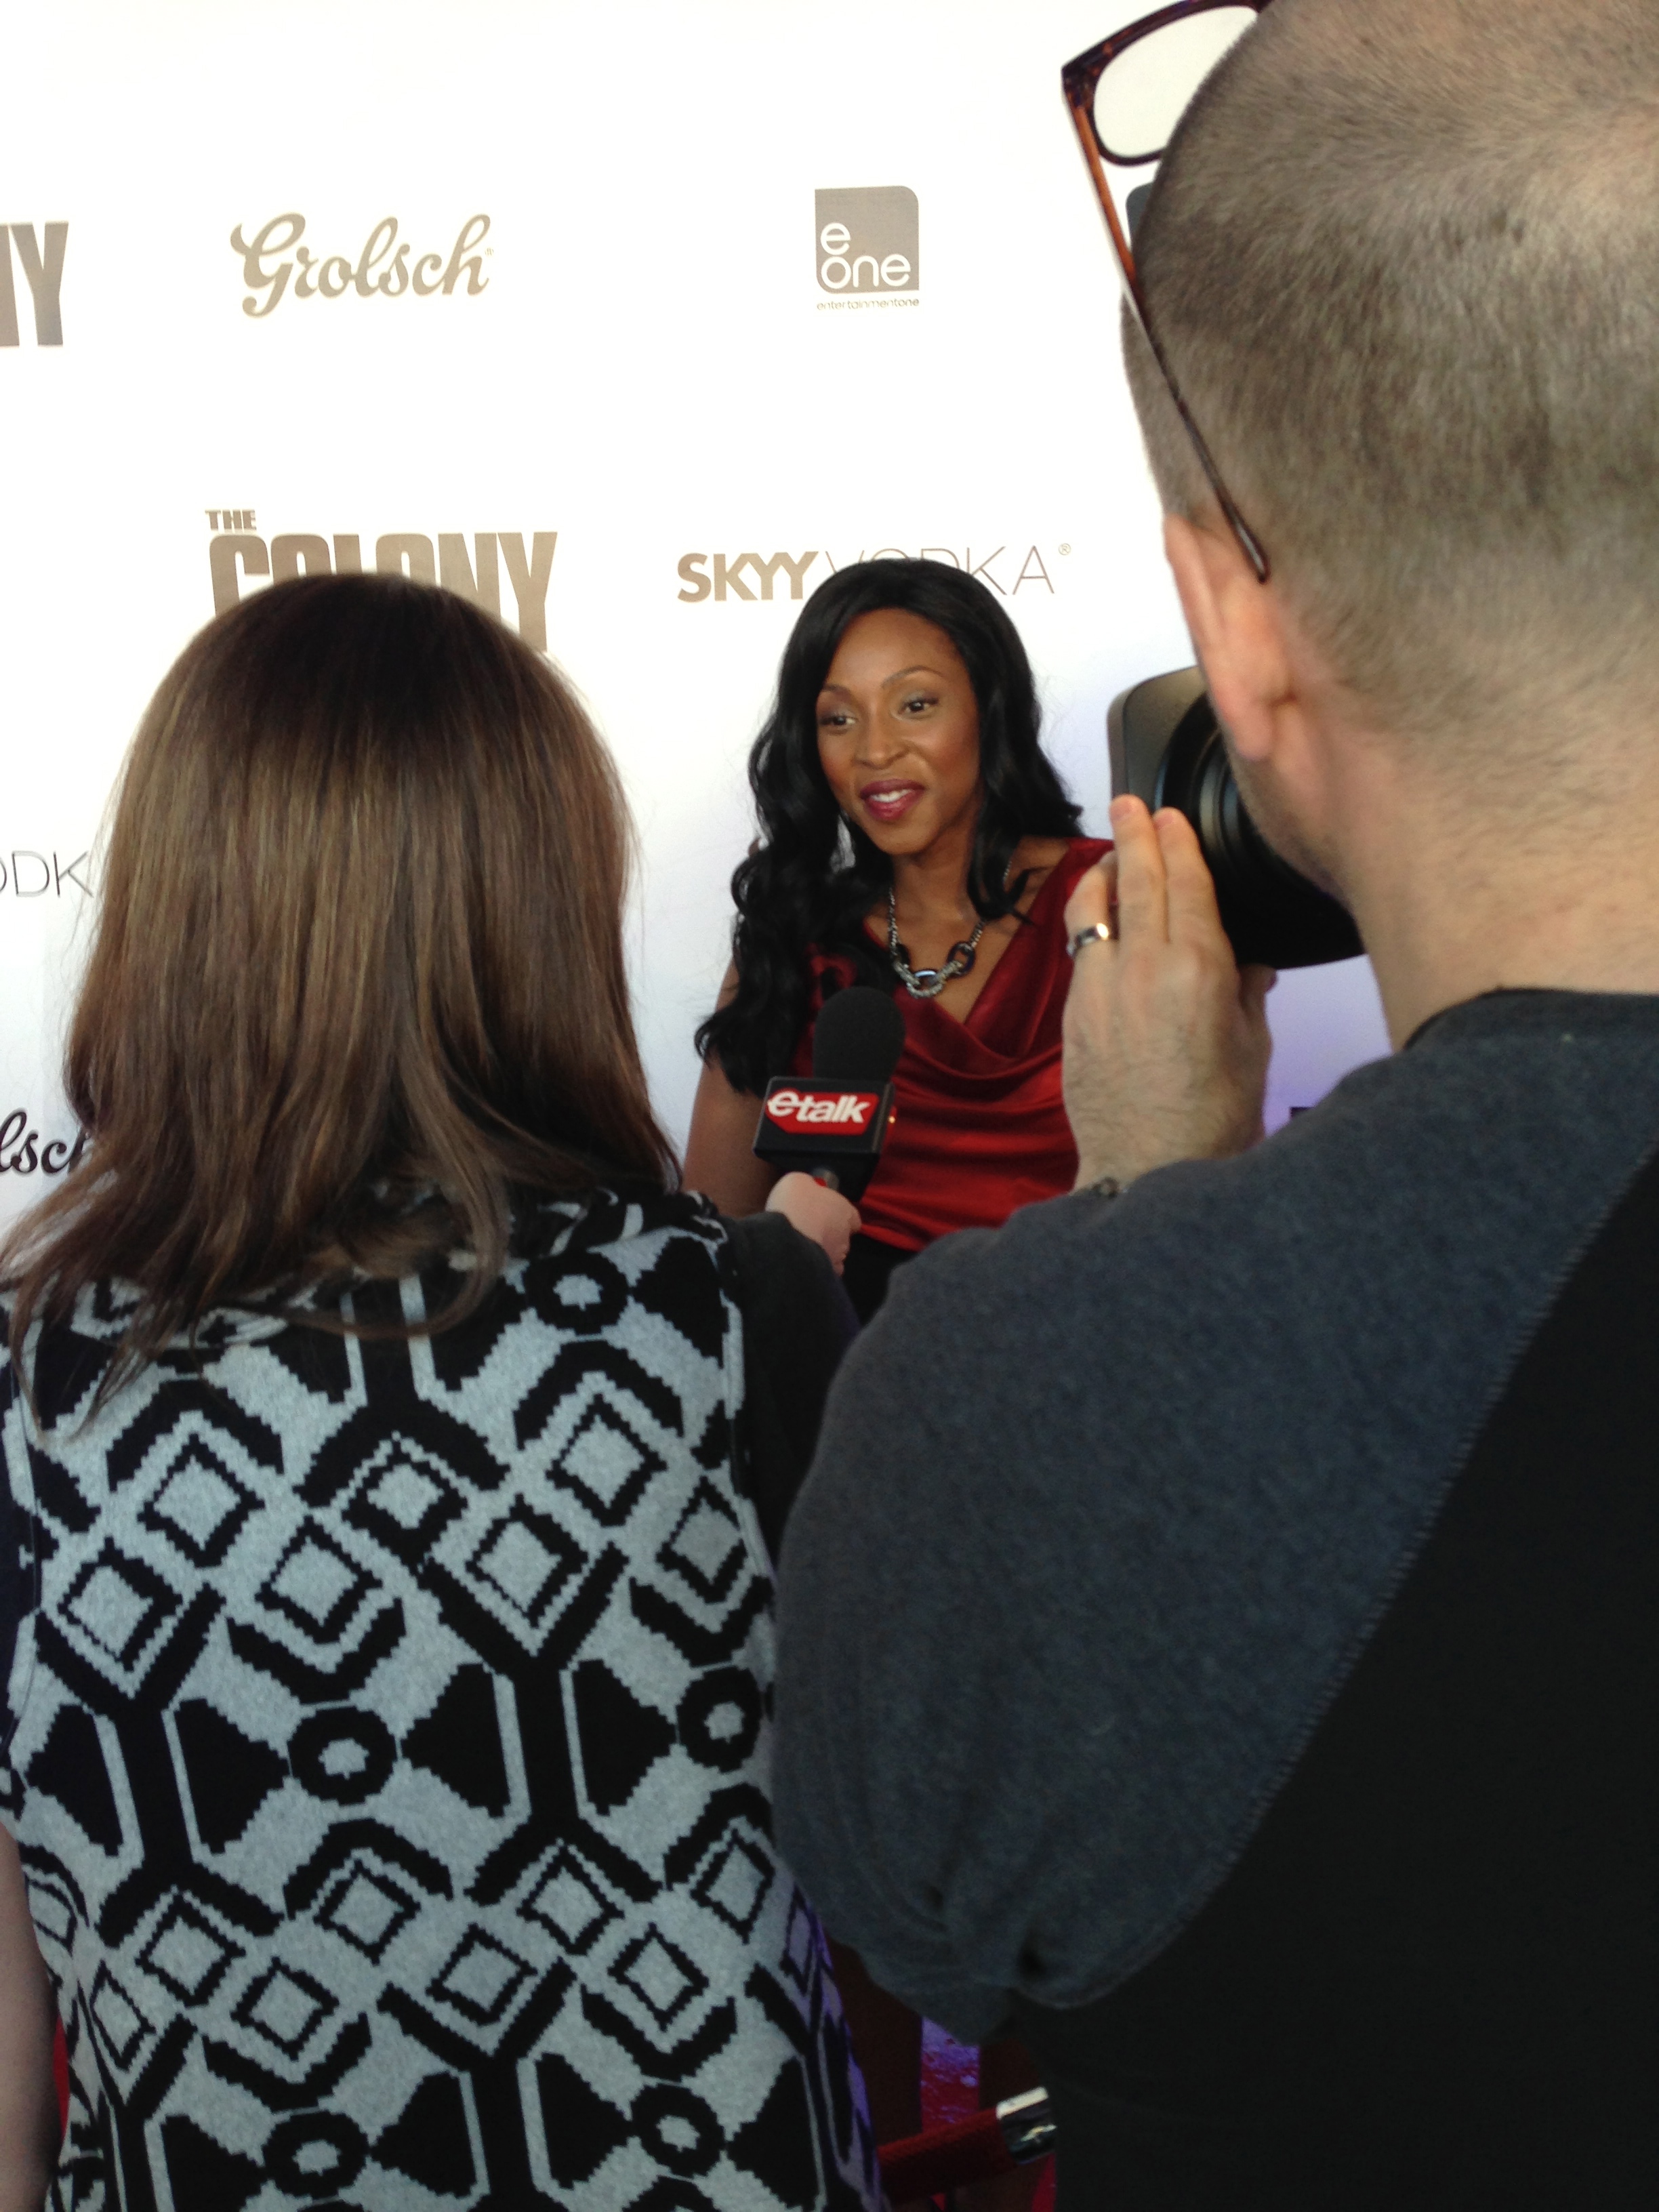 Lisa Berry at The Colony World Premiere